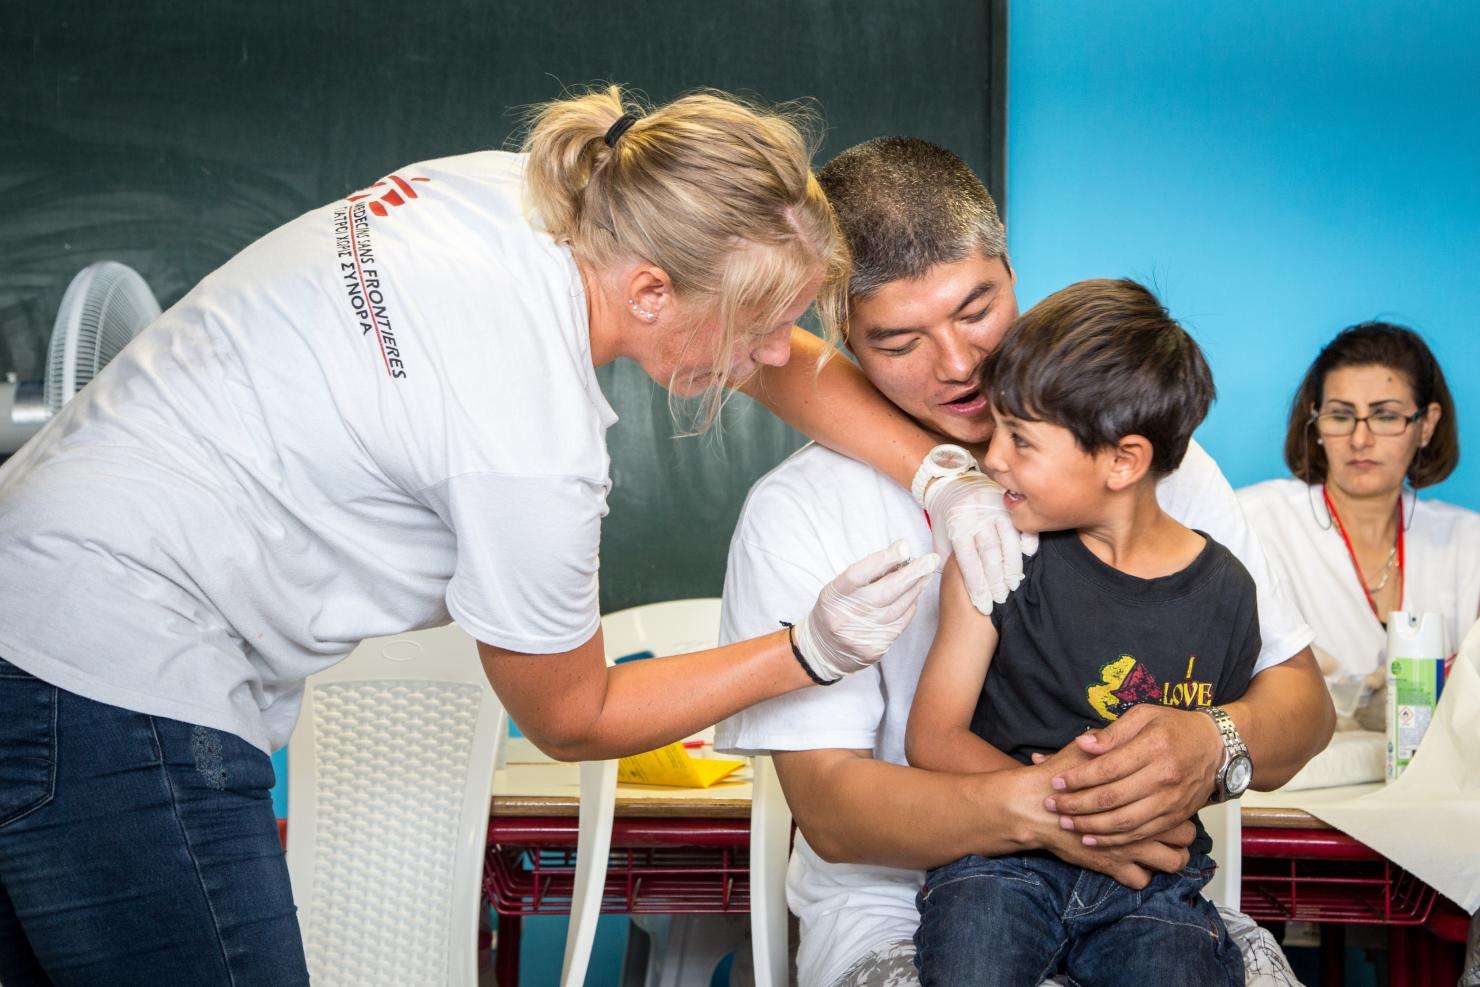 Supporting the Greek health authorities, MSF has conducted immunizations for children aged 6 weeks to 15 years in Elliniko. 